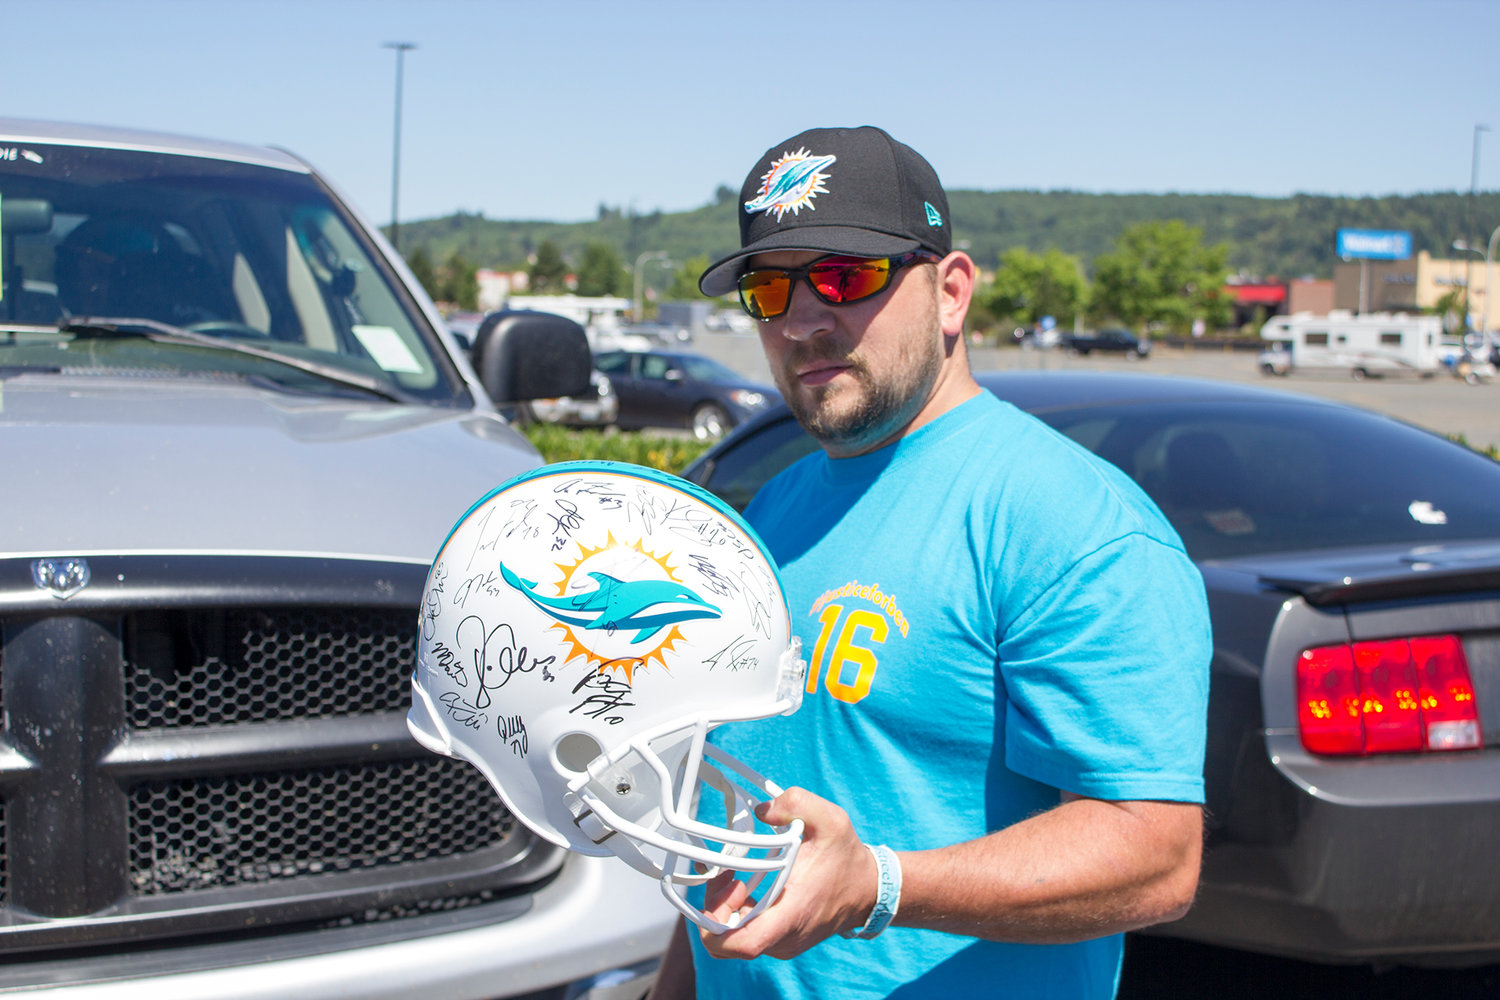 B.j. Eastman discusses gifts he received from the Miami Dolphins on Wednesday afternoon in Chehalis.